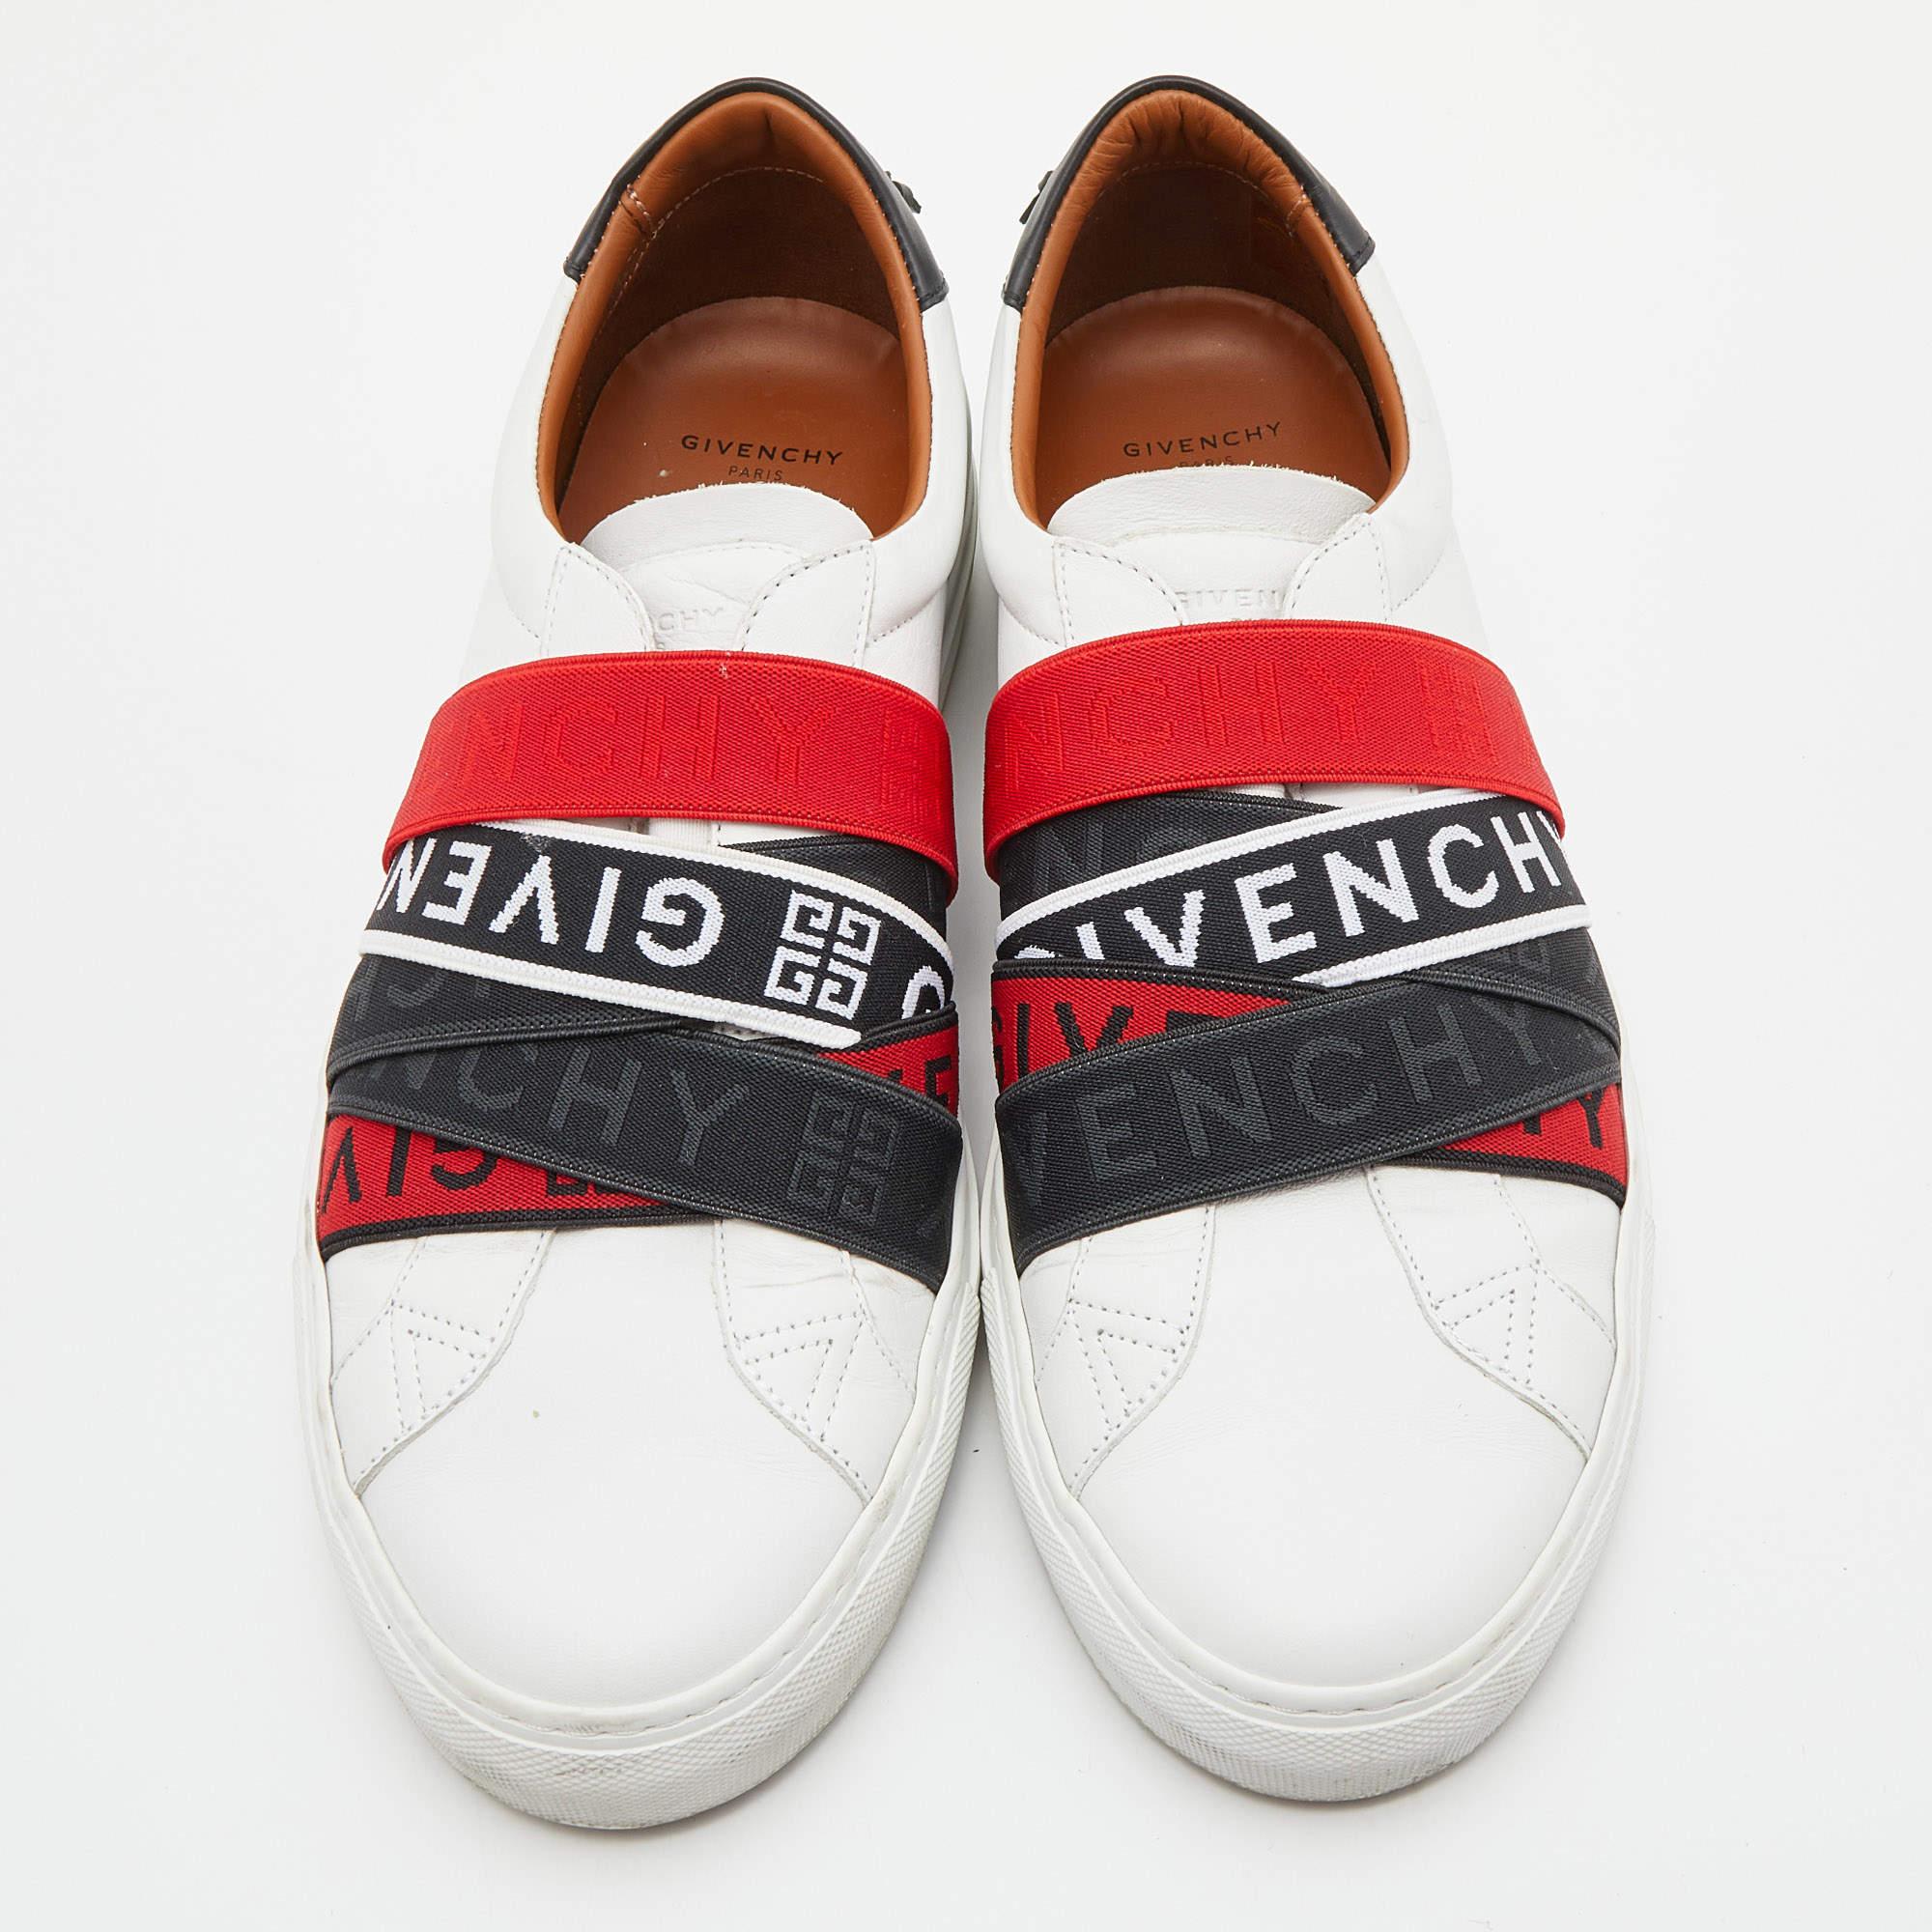 Crafted from white leather, Givenchy's sneakers are cool, casual, and smart. They feature branded elastic straps on the vamps for a fashionable look. Durability, style, and comfort make these sneakers a must-buy!

